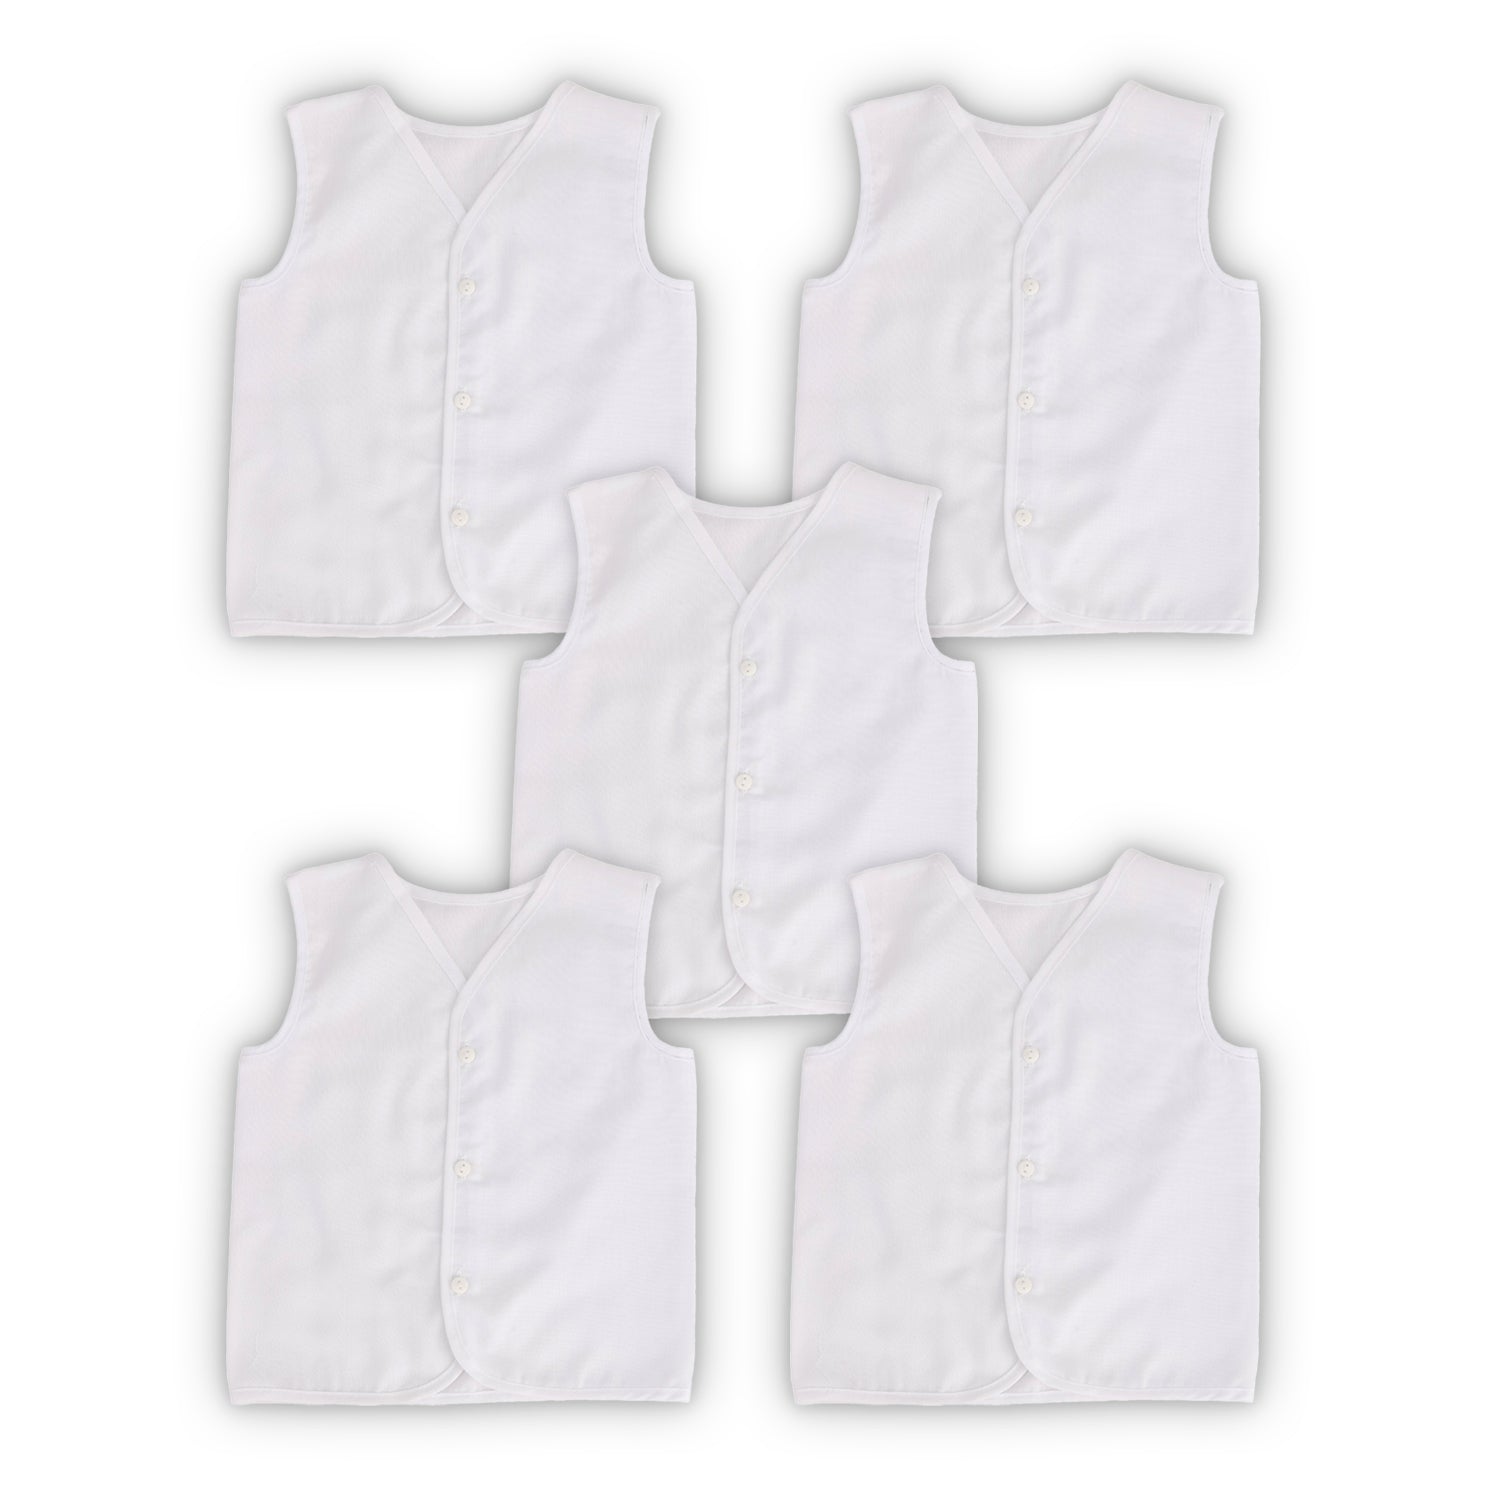 Baby Moo Solid V-Neck Sleeveless Front Opening Button Cotton Jhablas 5 Pcs - White